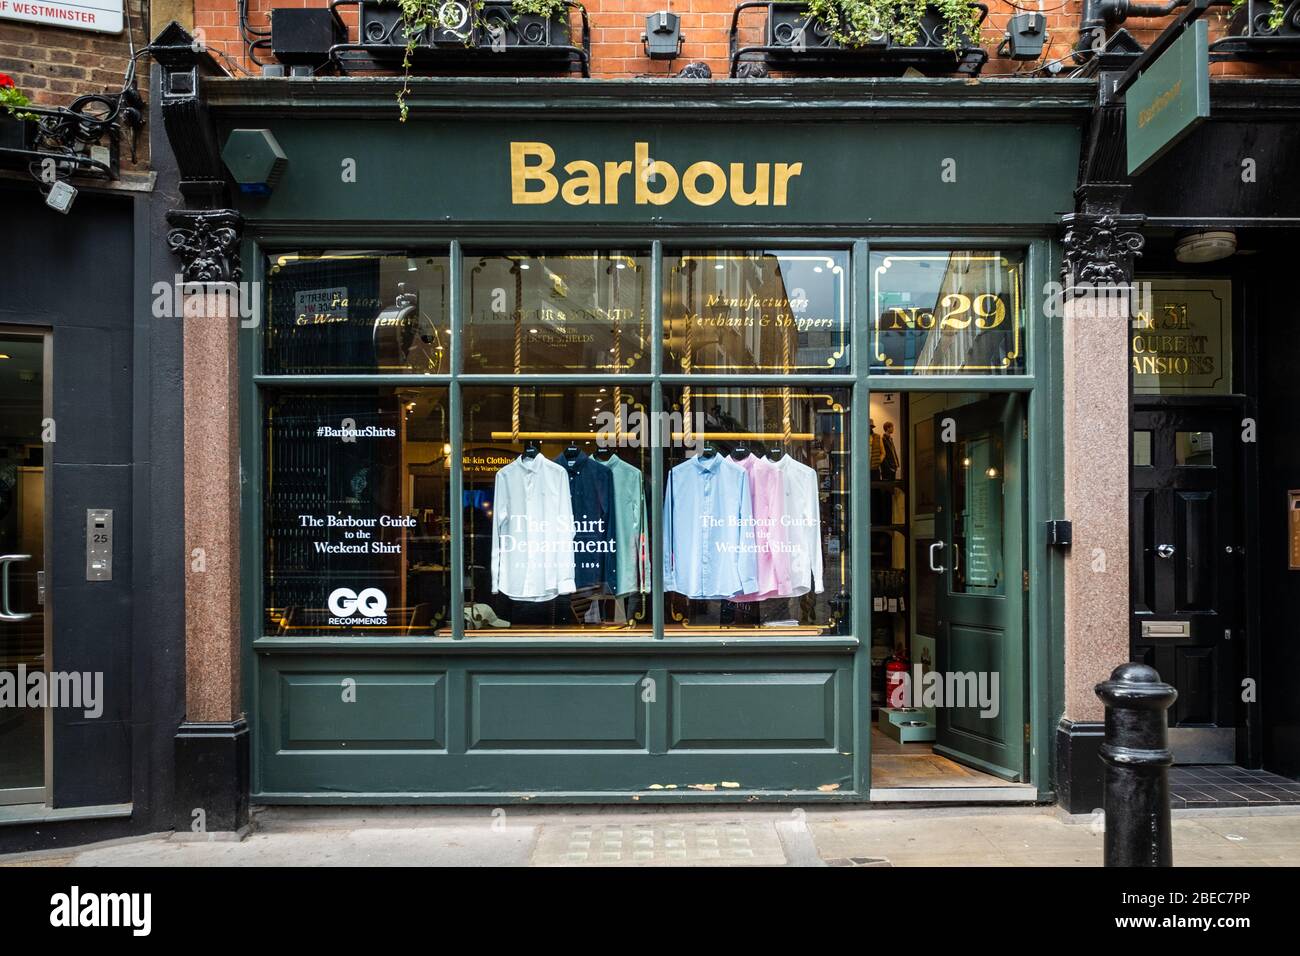 barbour outlet locations